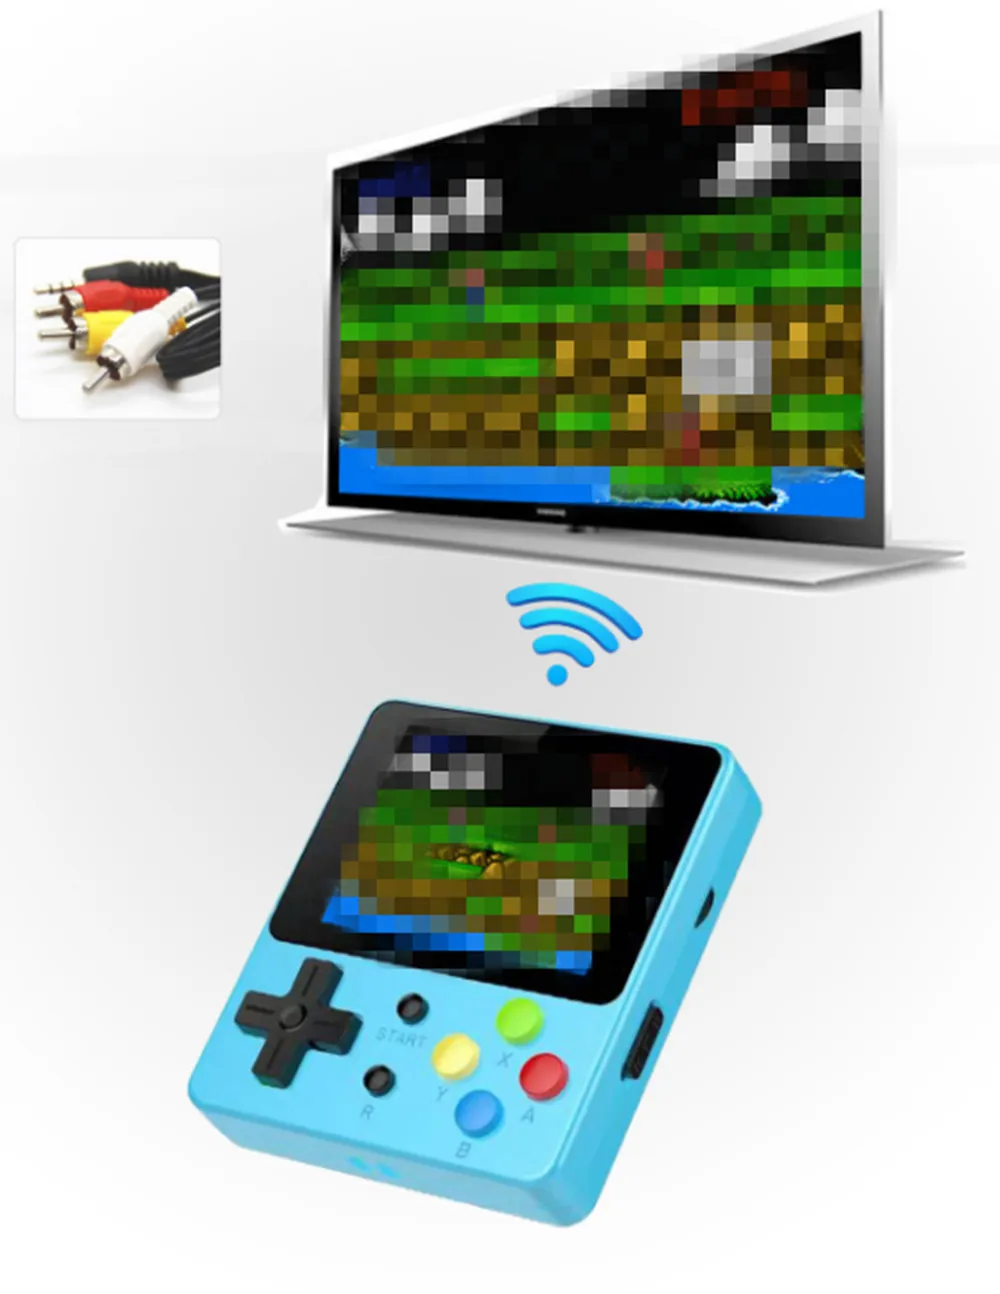 2.4 inch IPS screen 8-bit handheld built-in 188 mini game console 128M memory handheld game console